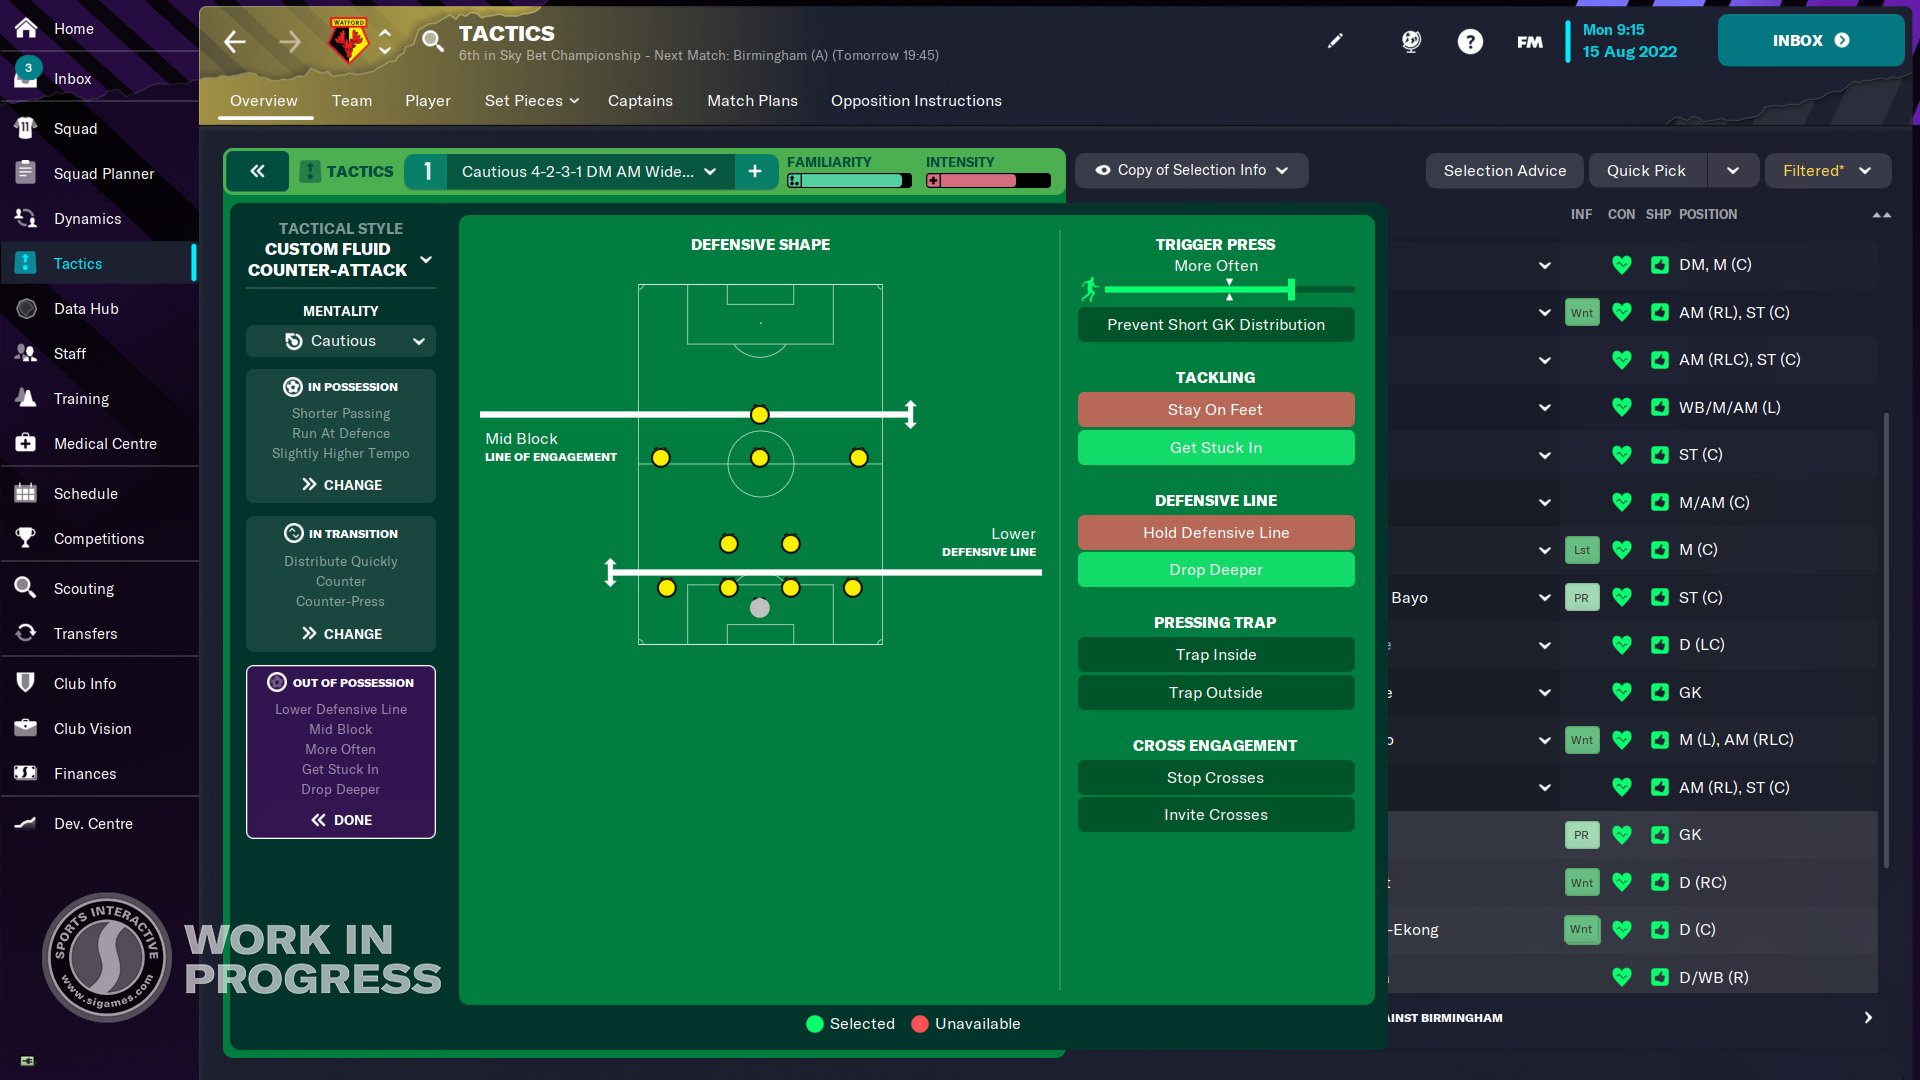 Football Manager 2023 Early Access Beta Available Now